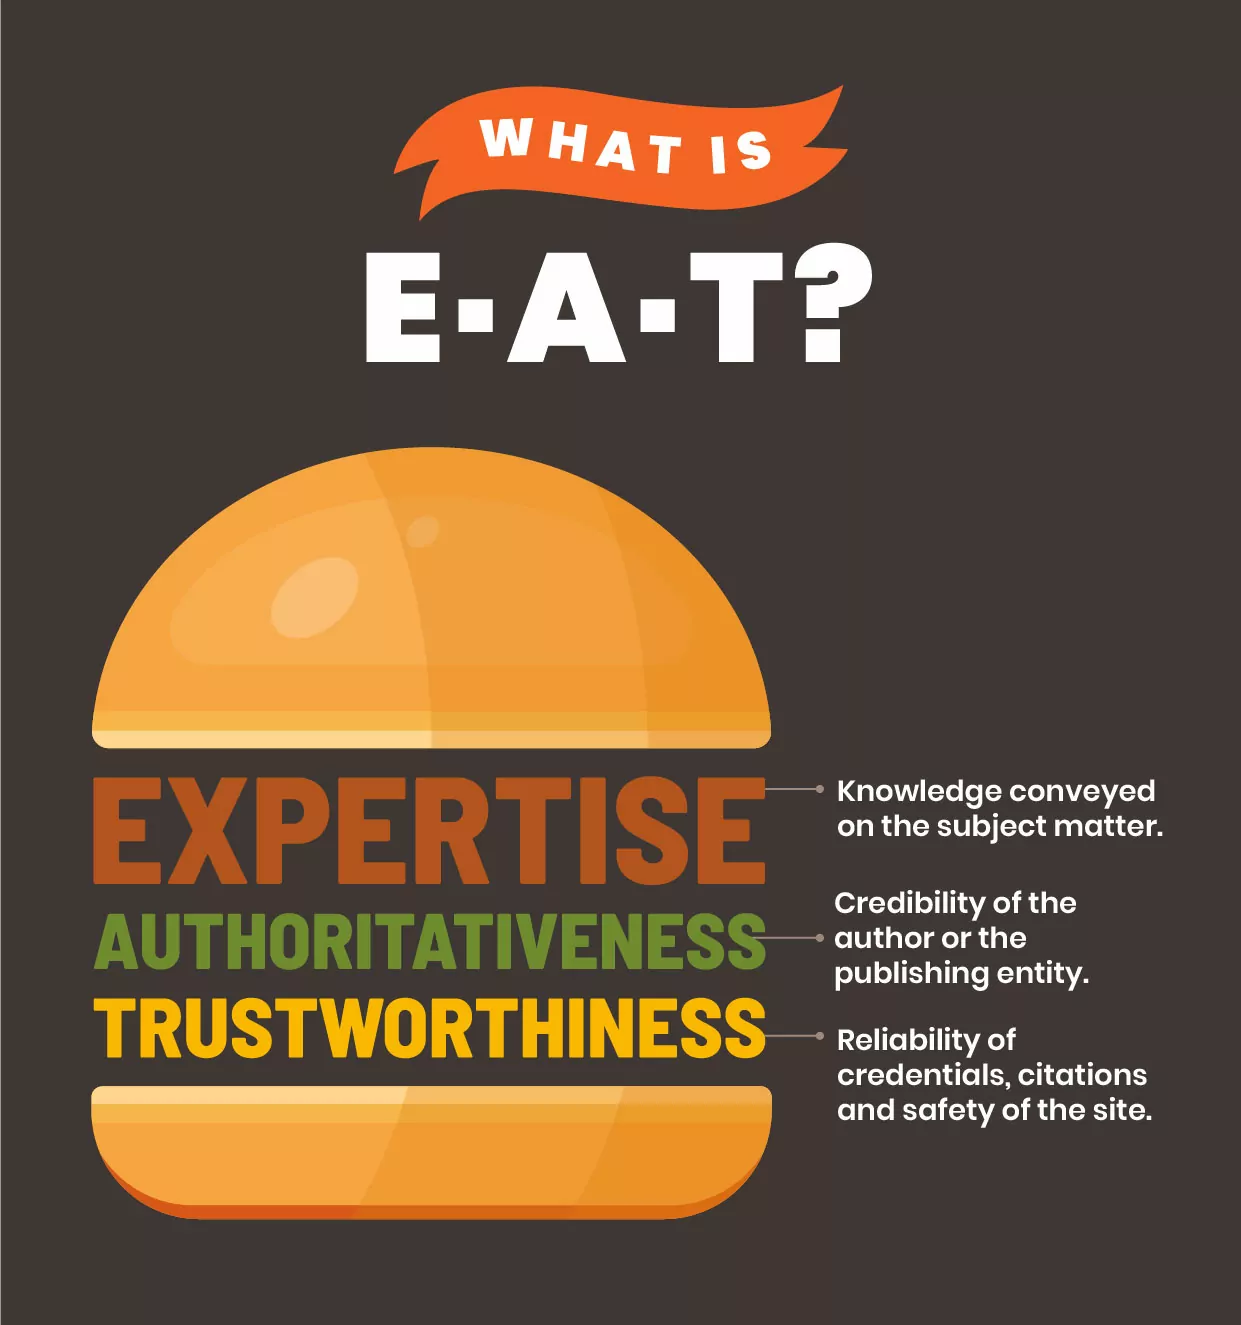 Hamburger bun infographic of expertise, authoritativeness, and trustworthiness sandwiched between a bun